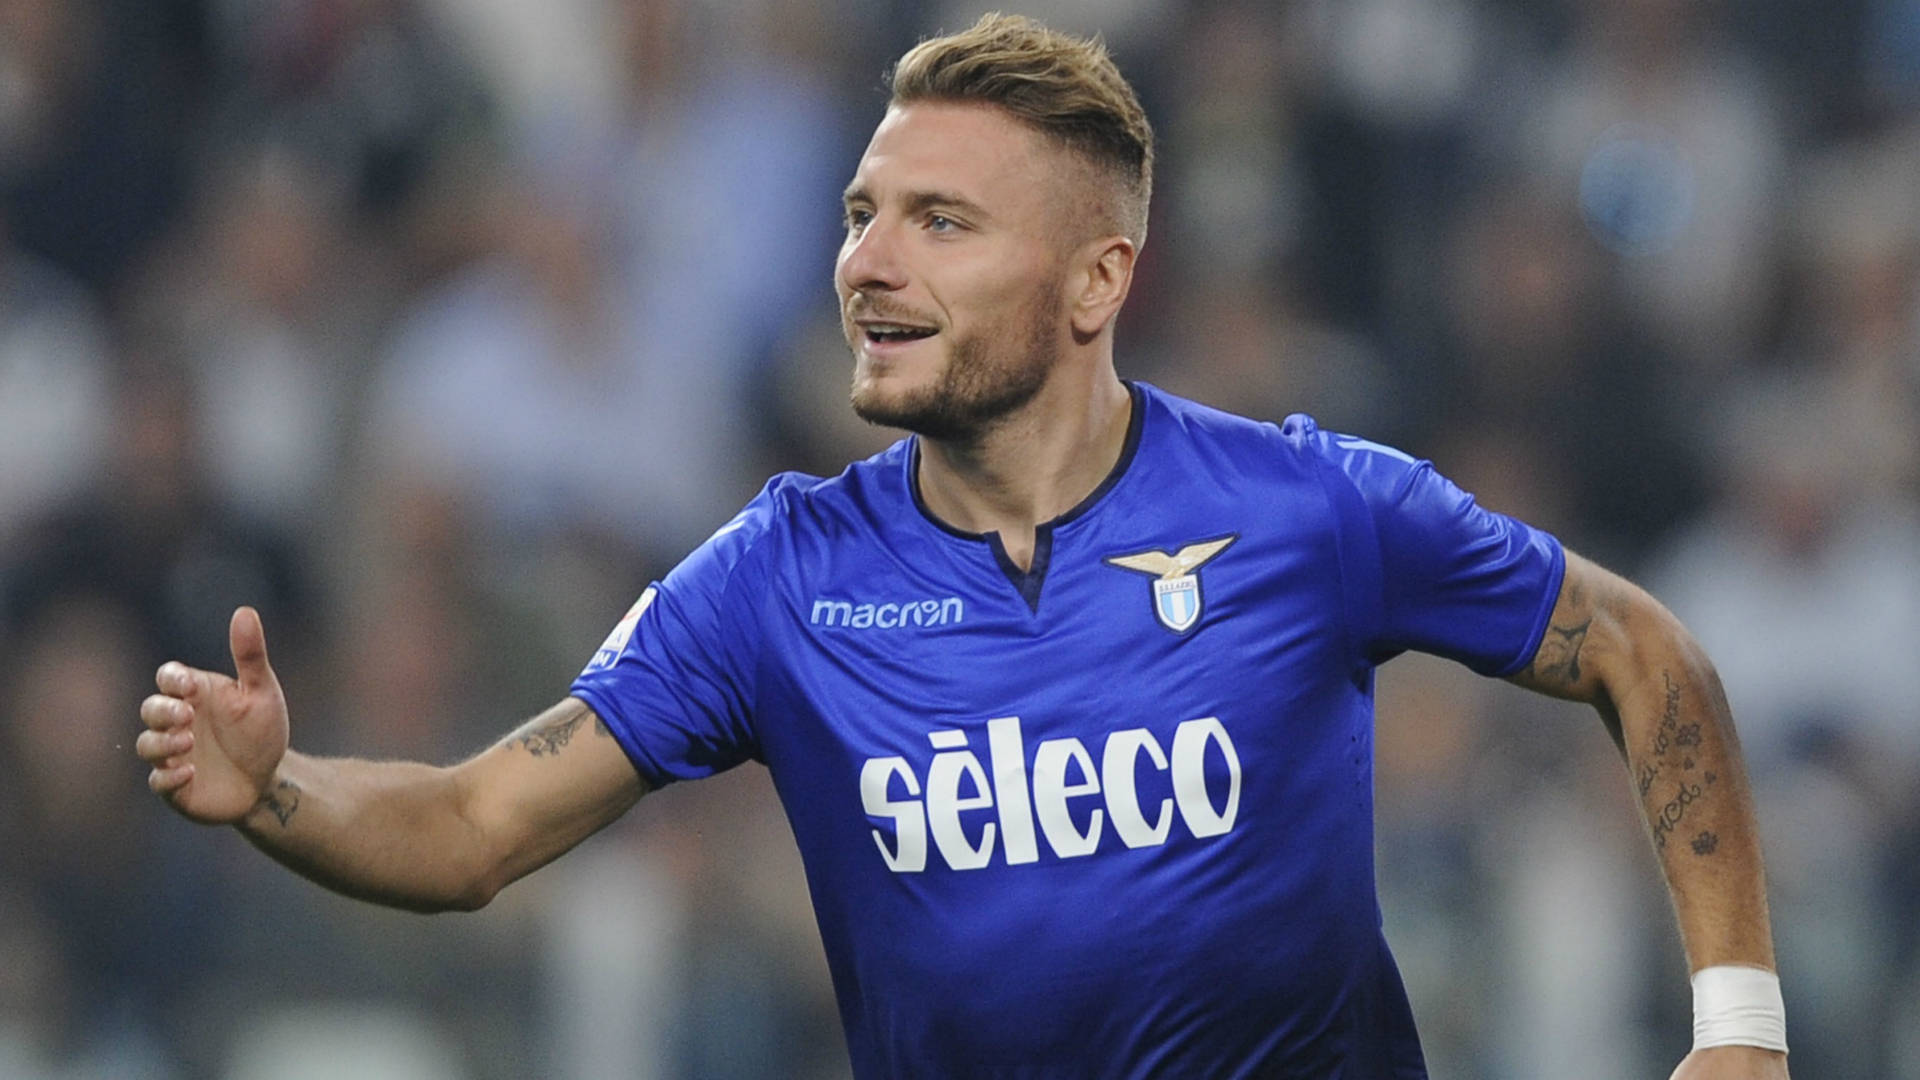 Ciro Immobile In Action On The Soccer Field Wallpaper